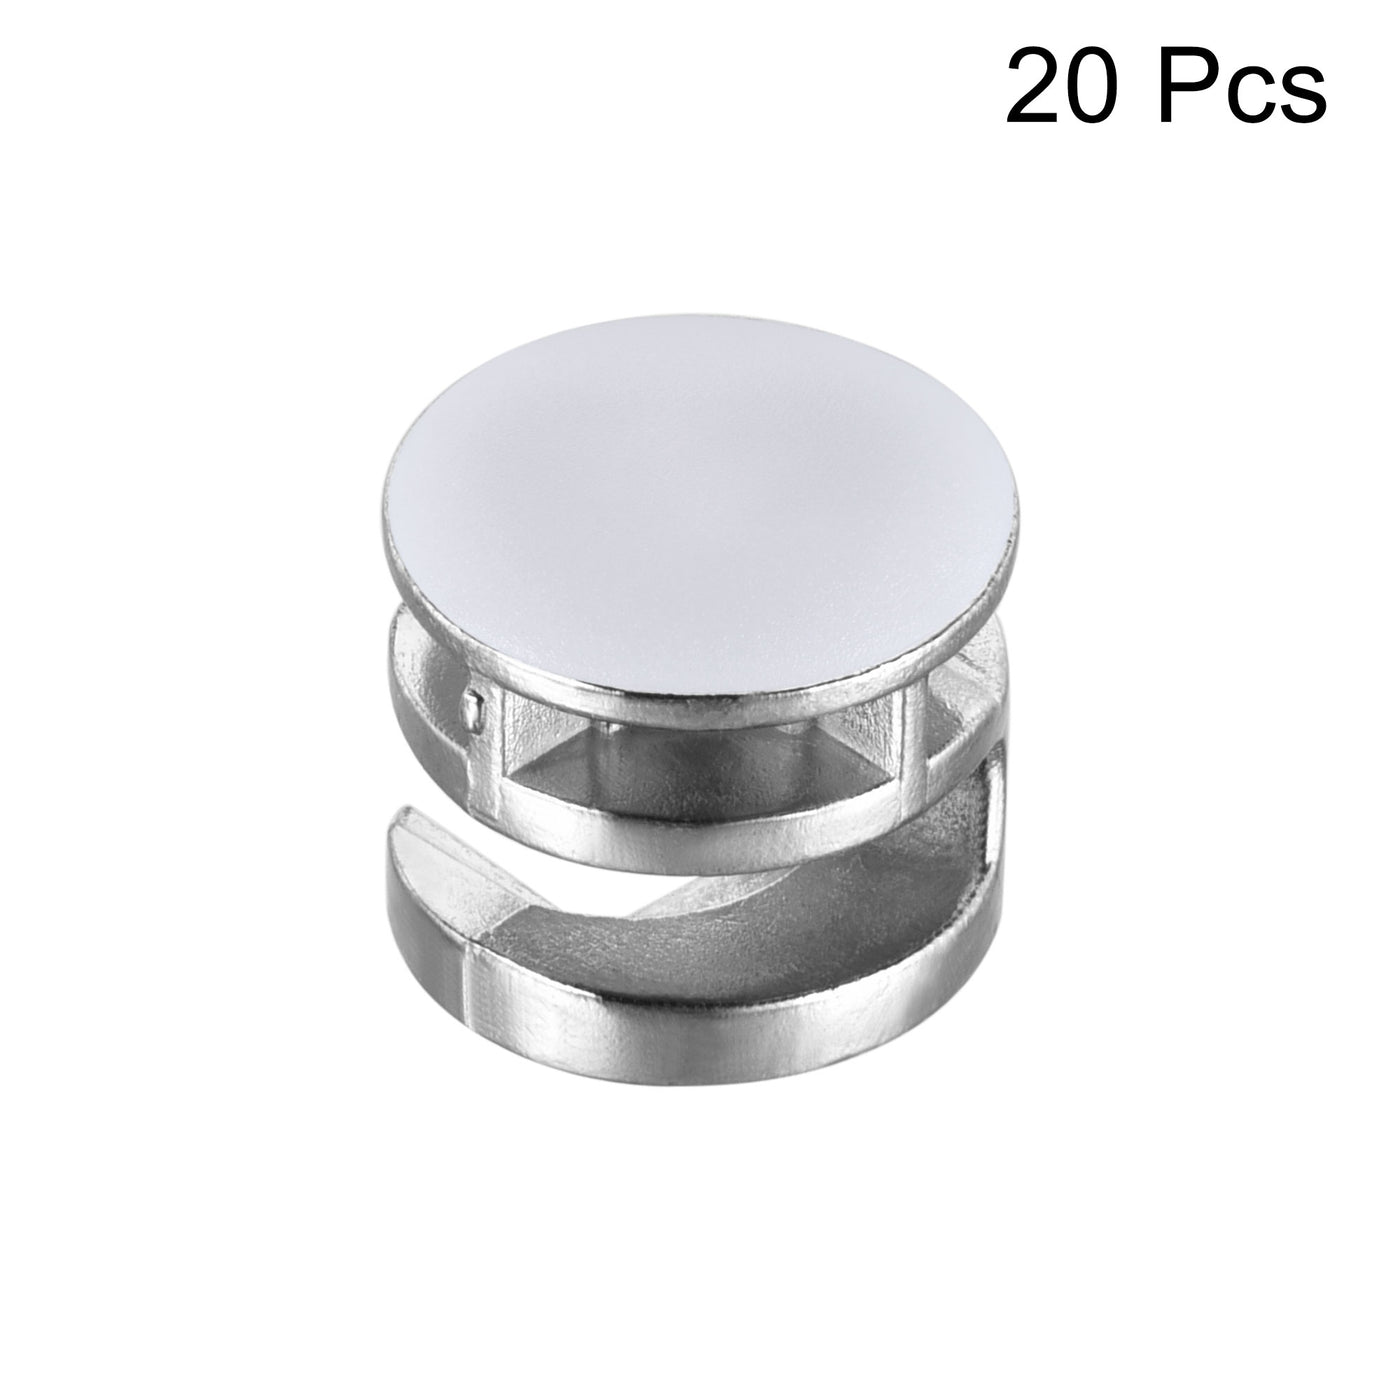 Uxcell Uxcell Furniture Connector Cam Lock Fittings 15mm x 12mm with Light Yellow Cover for Furniture Panel Connecting 20pcs